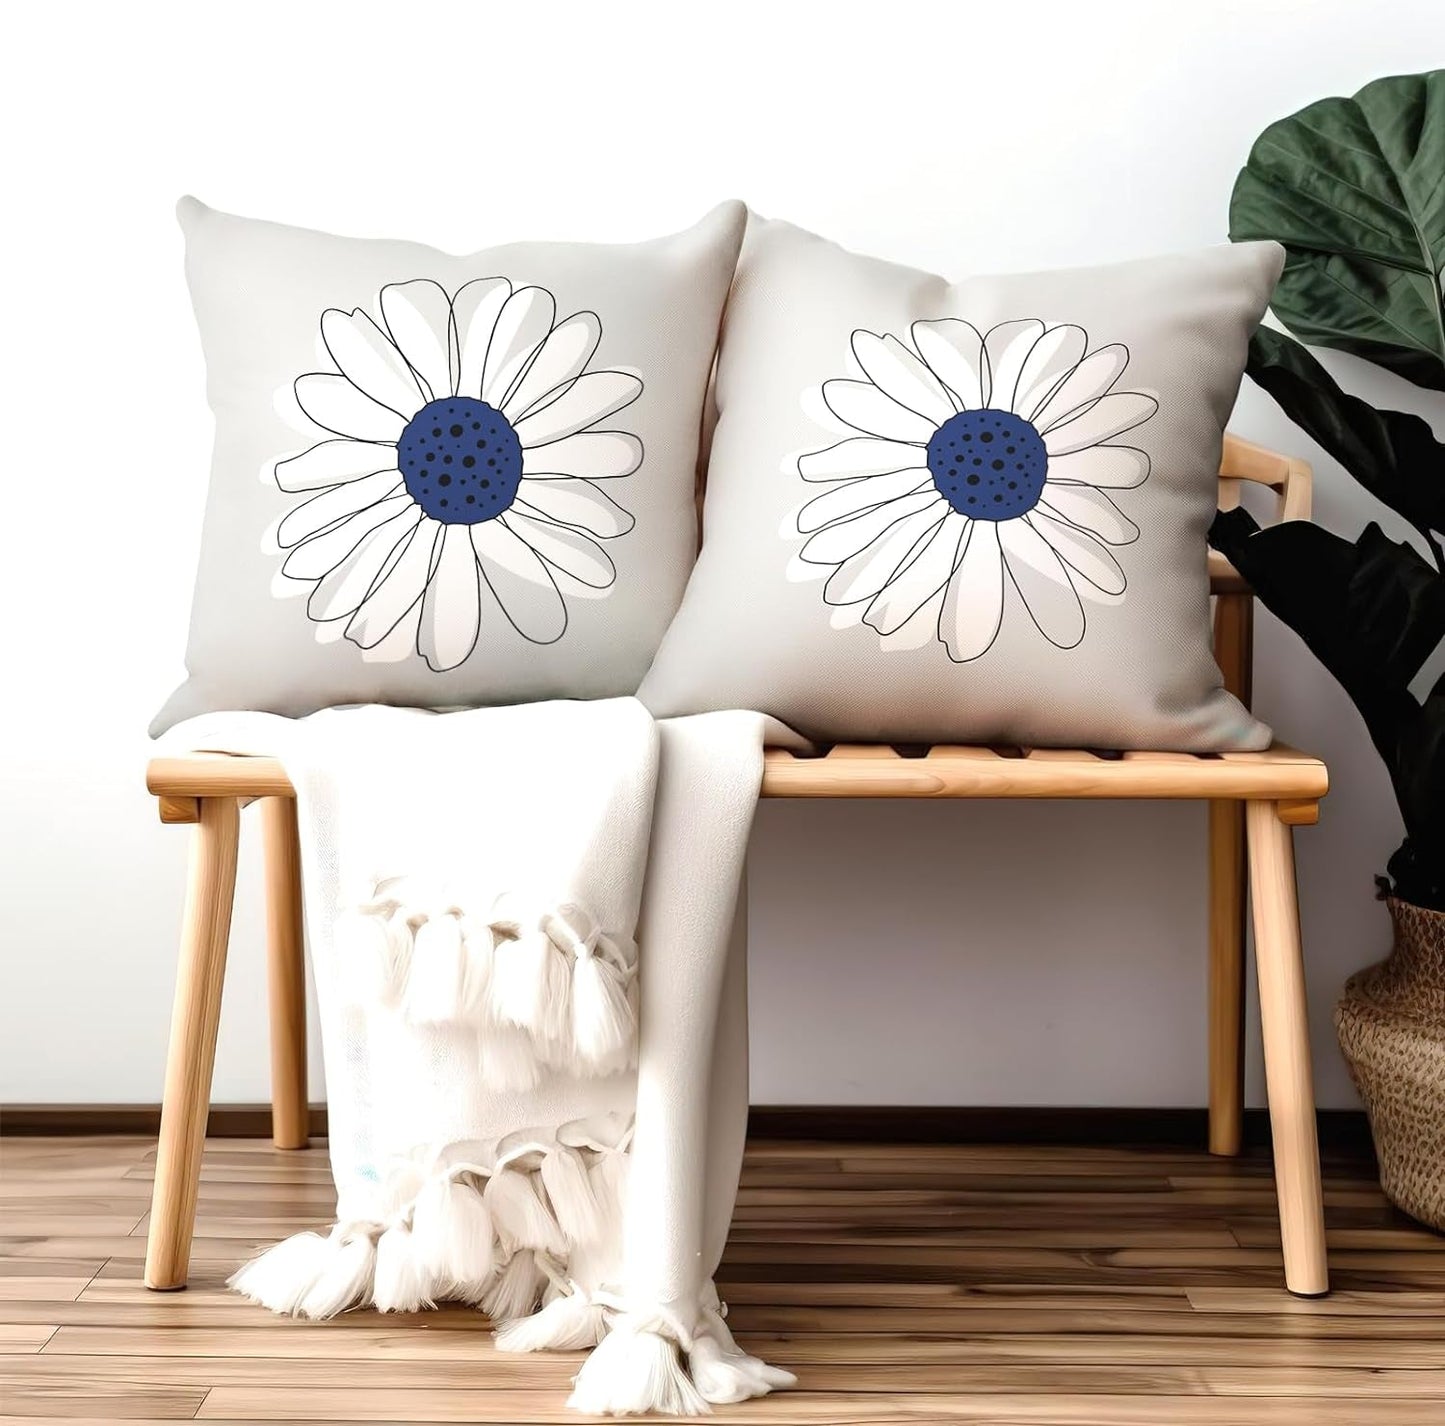 Summer Daisy Pillow Covers 16X16 Inch Blue Gray Throw Pillow Cases Seasonal Floral Pillowcase Flower Cotton Linen Outdoor Cushion Covers Home Decorations for Bed Sofa Couch Set of 2